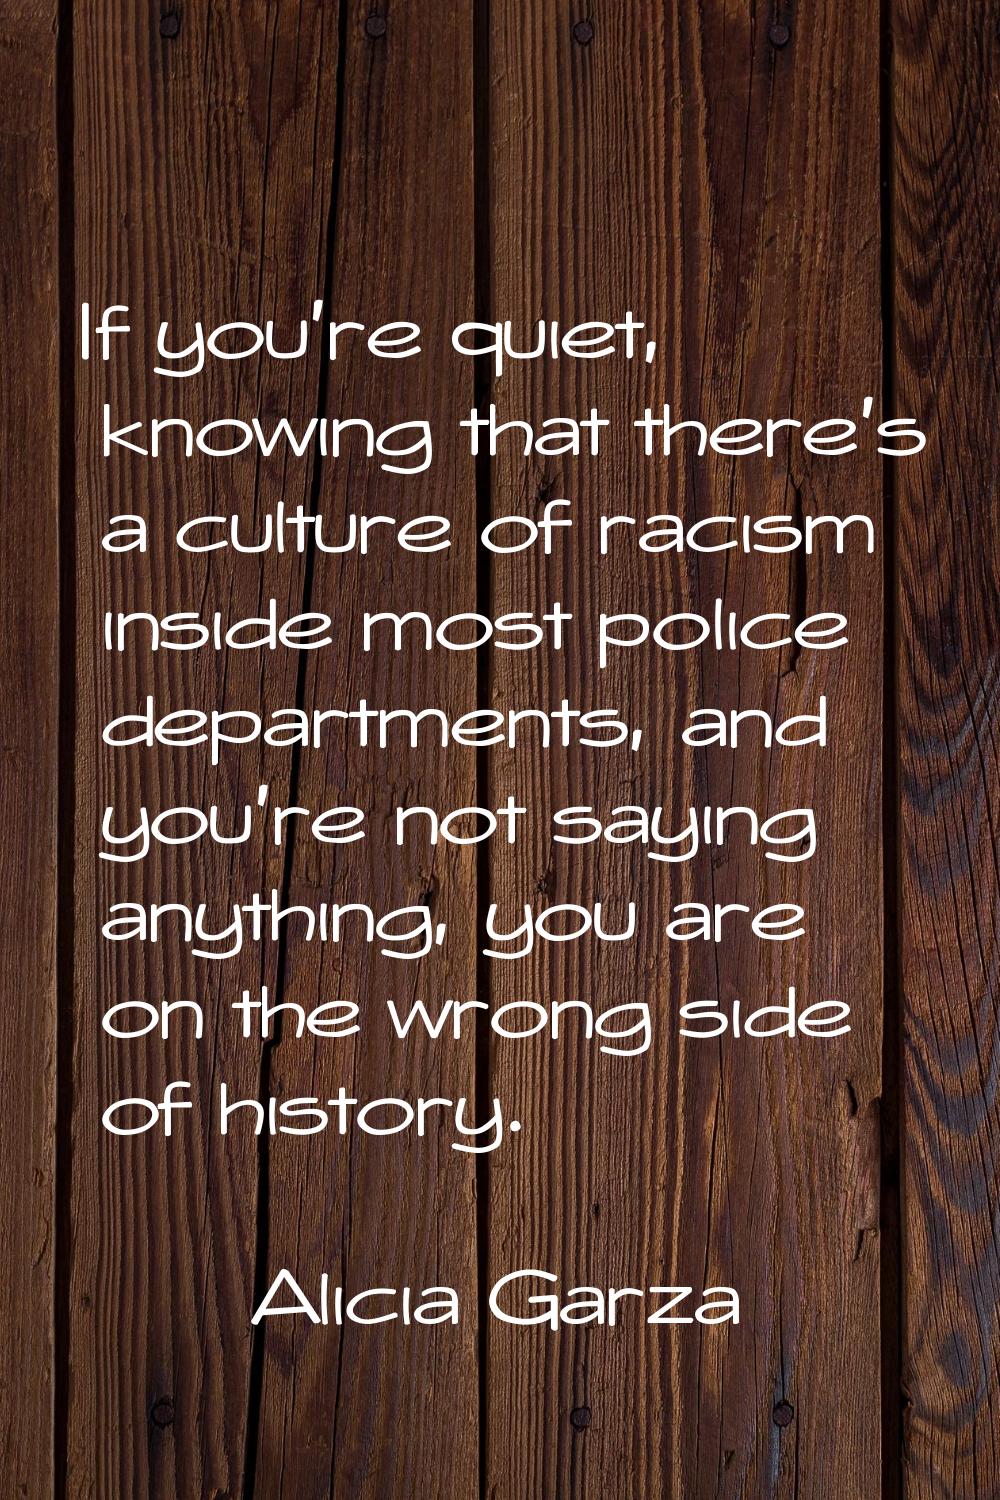 If you're quiet, knowing that there's a culture of racism inside most police departments, and you'r